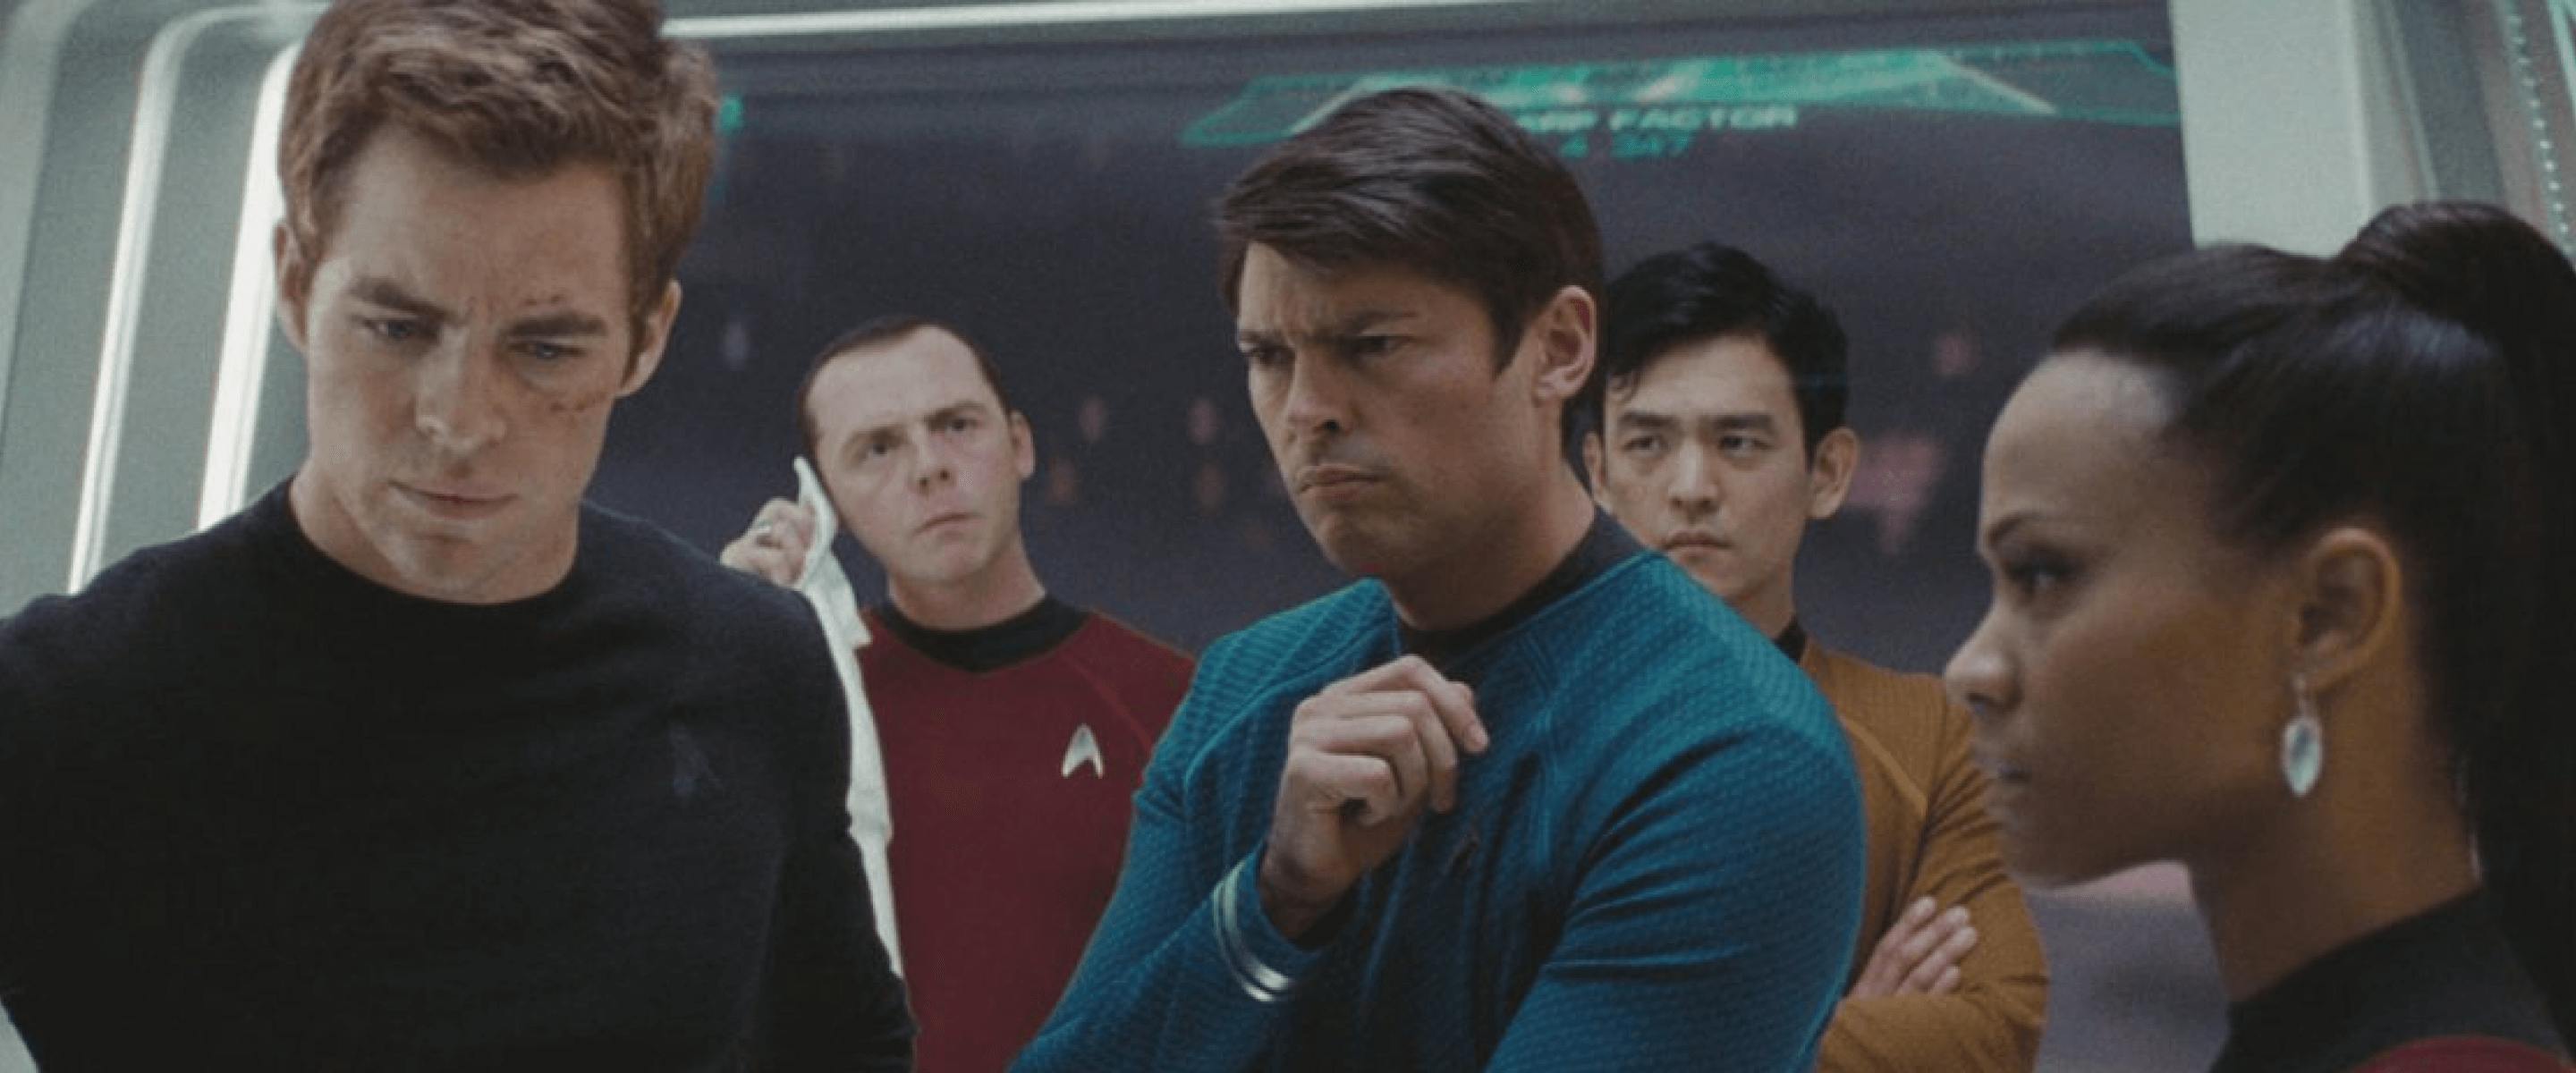 Shoot from Star Trek 2009 movie: Captain Kirk and his team are concerned and thinking about something